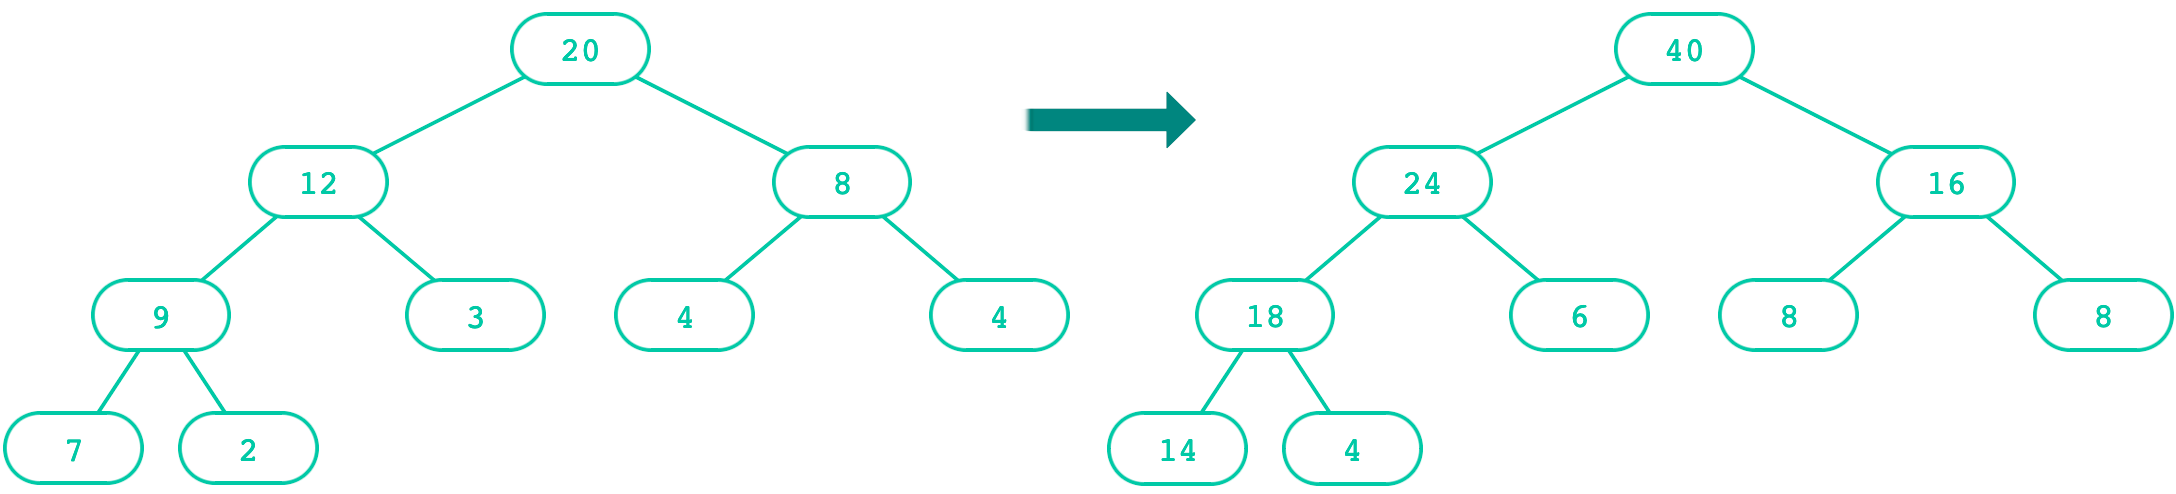 Doubling trees diagram